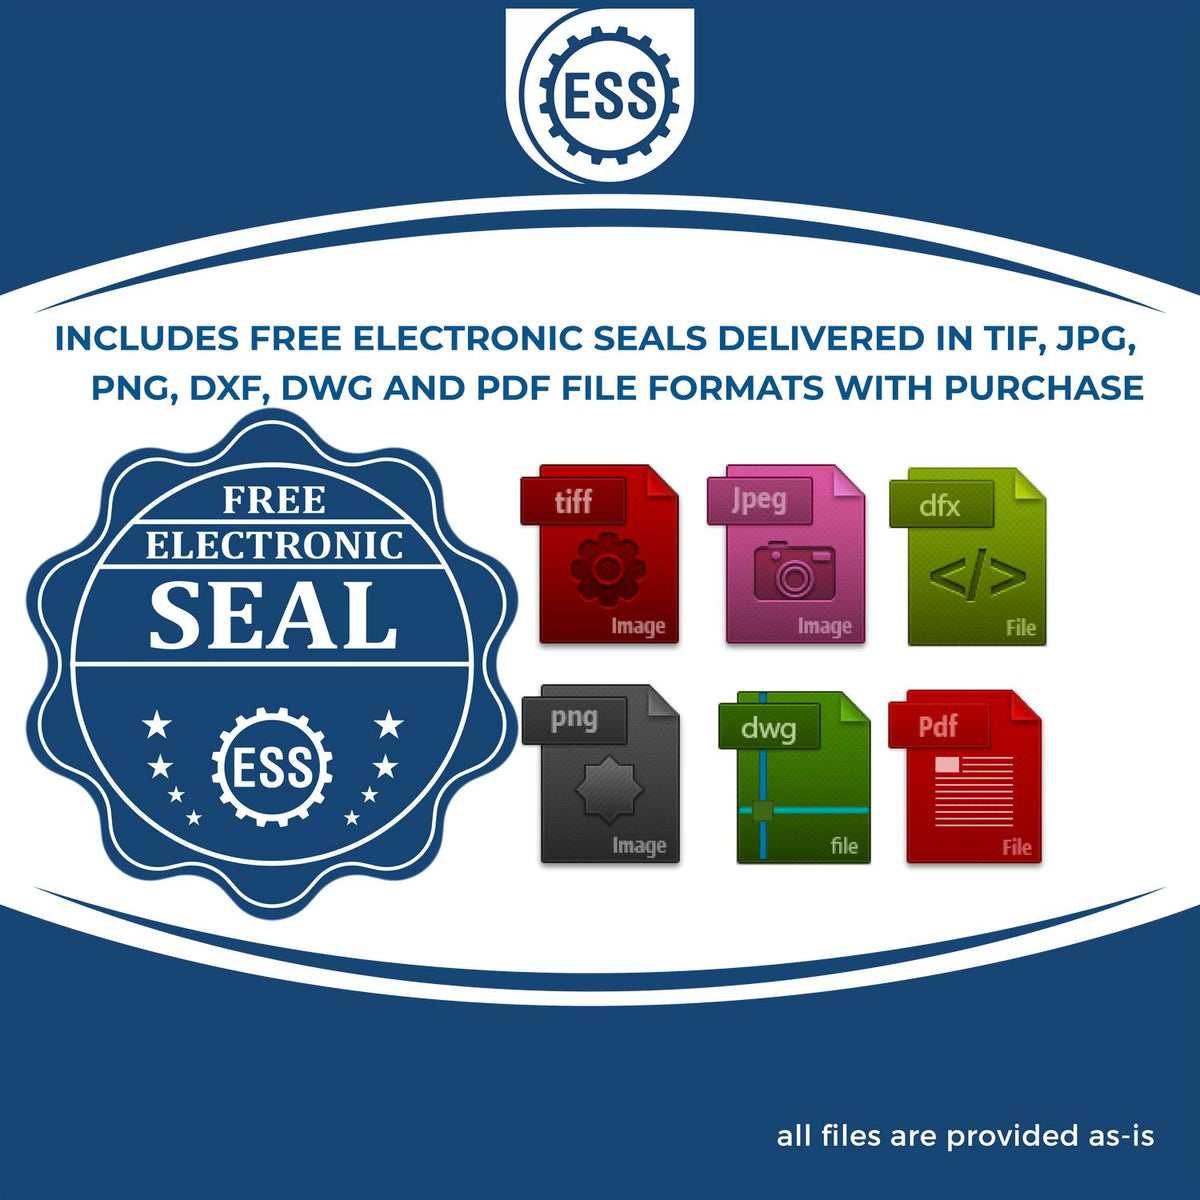 An infographic for the free electronic seal for the Heavy Duty Cast Iron Iowa Engineer Seal Embosser illustrating the different file type icons such as DXF, DWG, TIF, JPG and PNG.